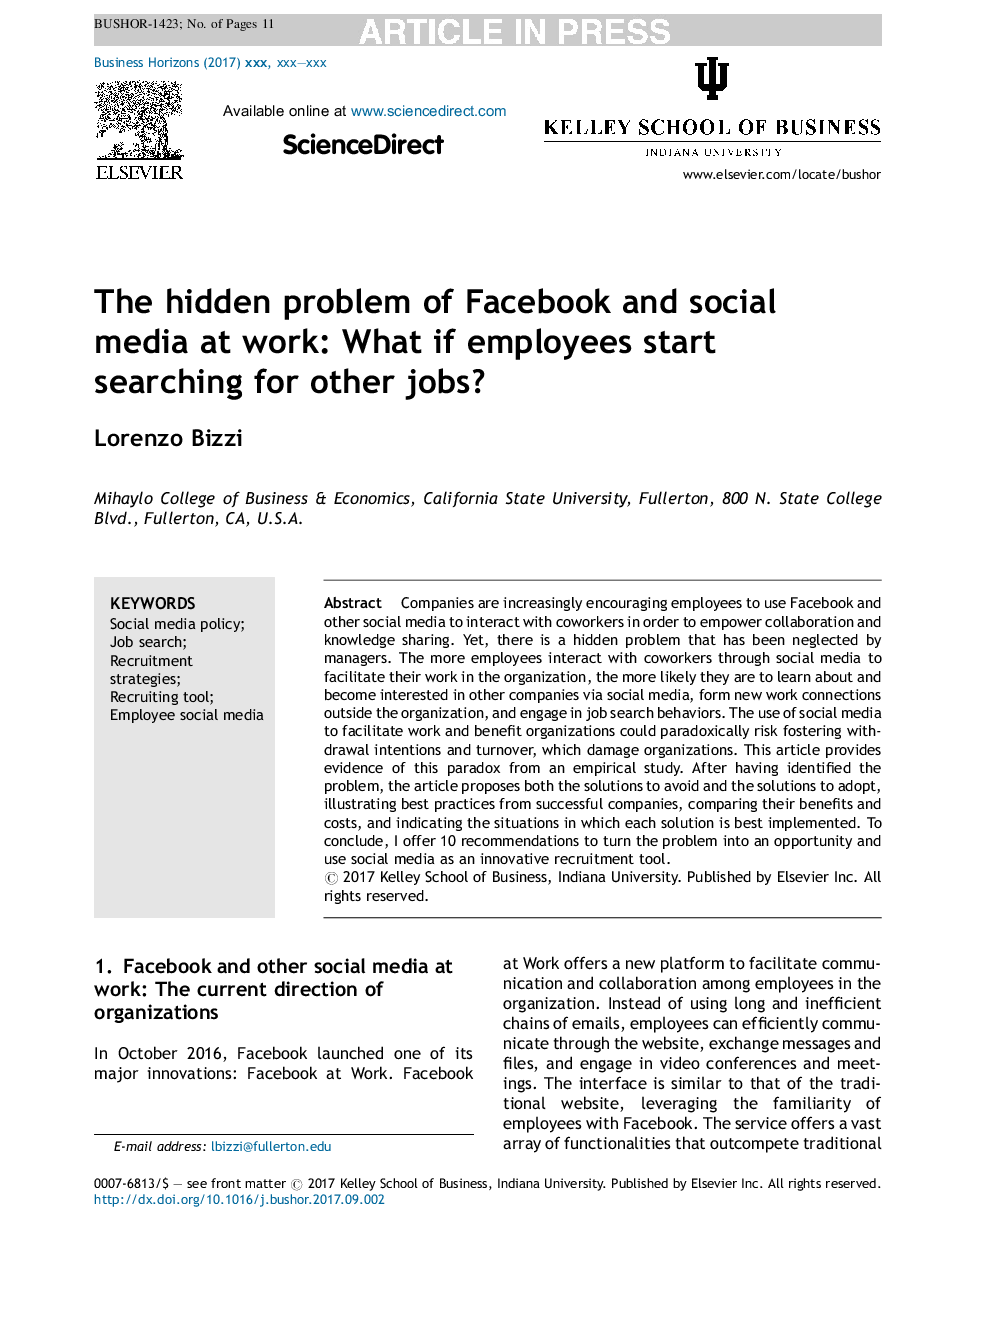 The hidden problem of Facebook and social media at work: What if employees start searching for other jobs?